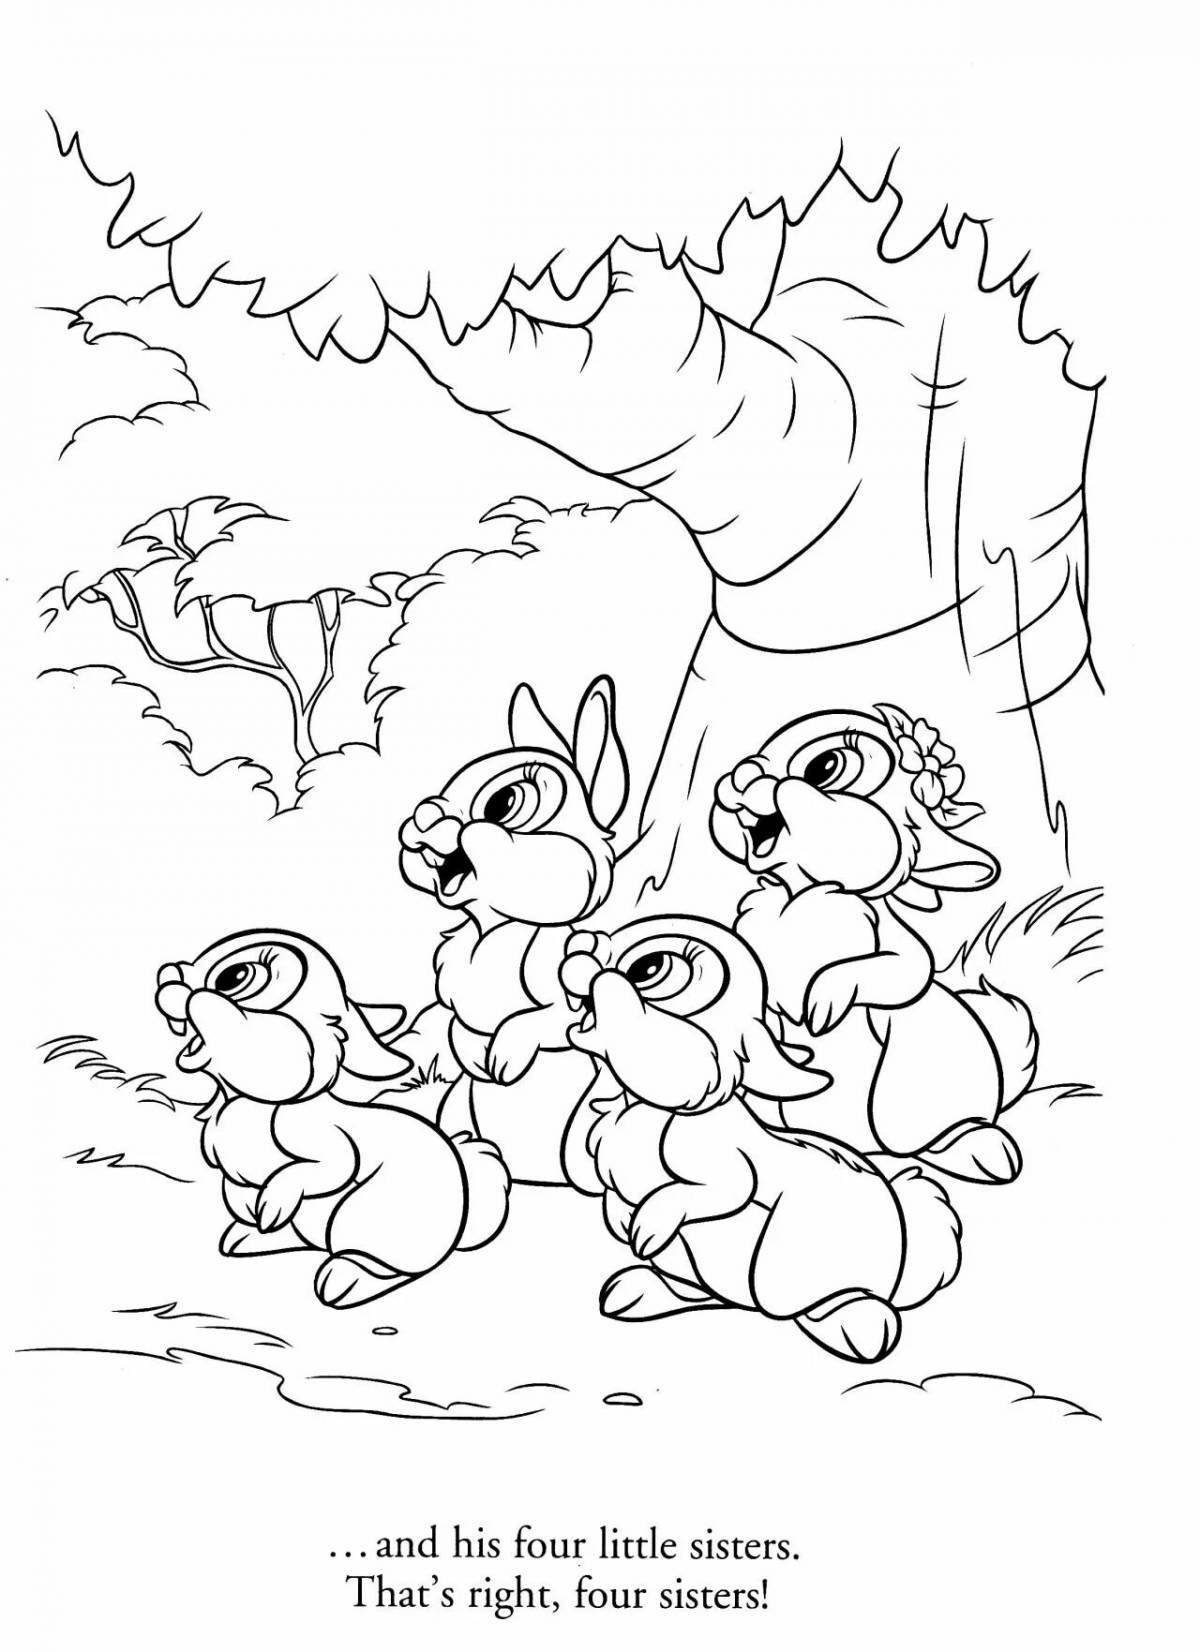 Playful bambi hare coloring page